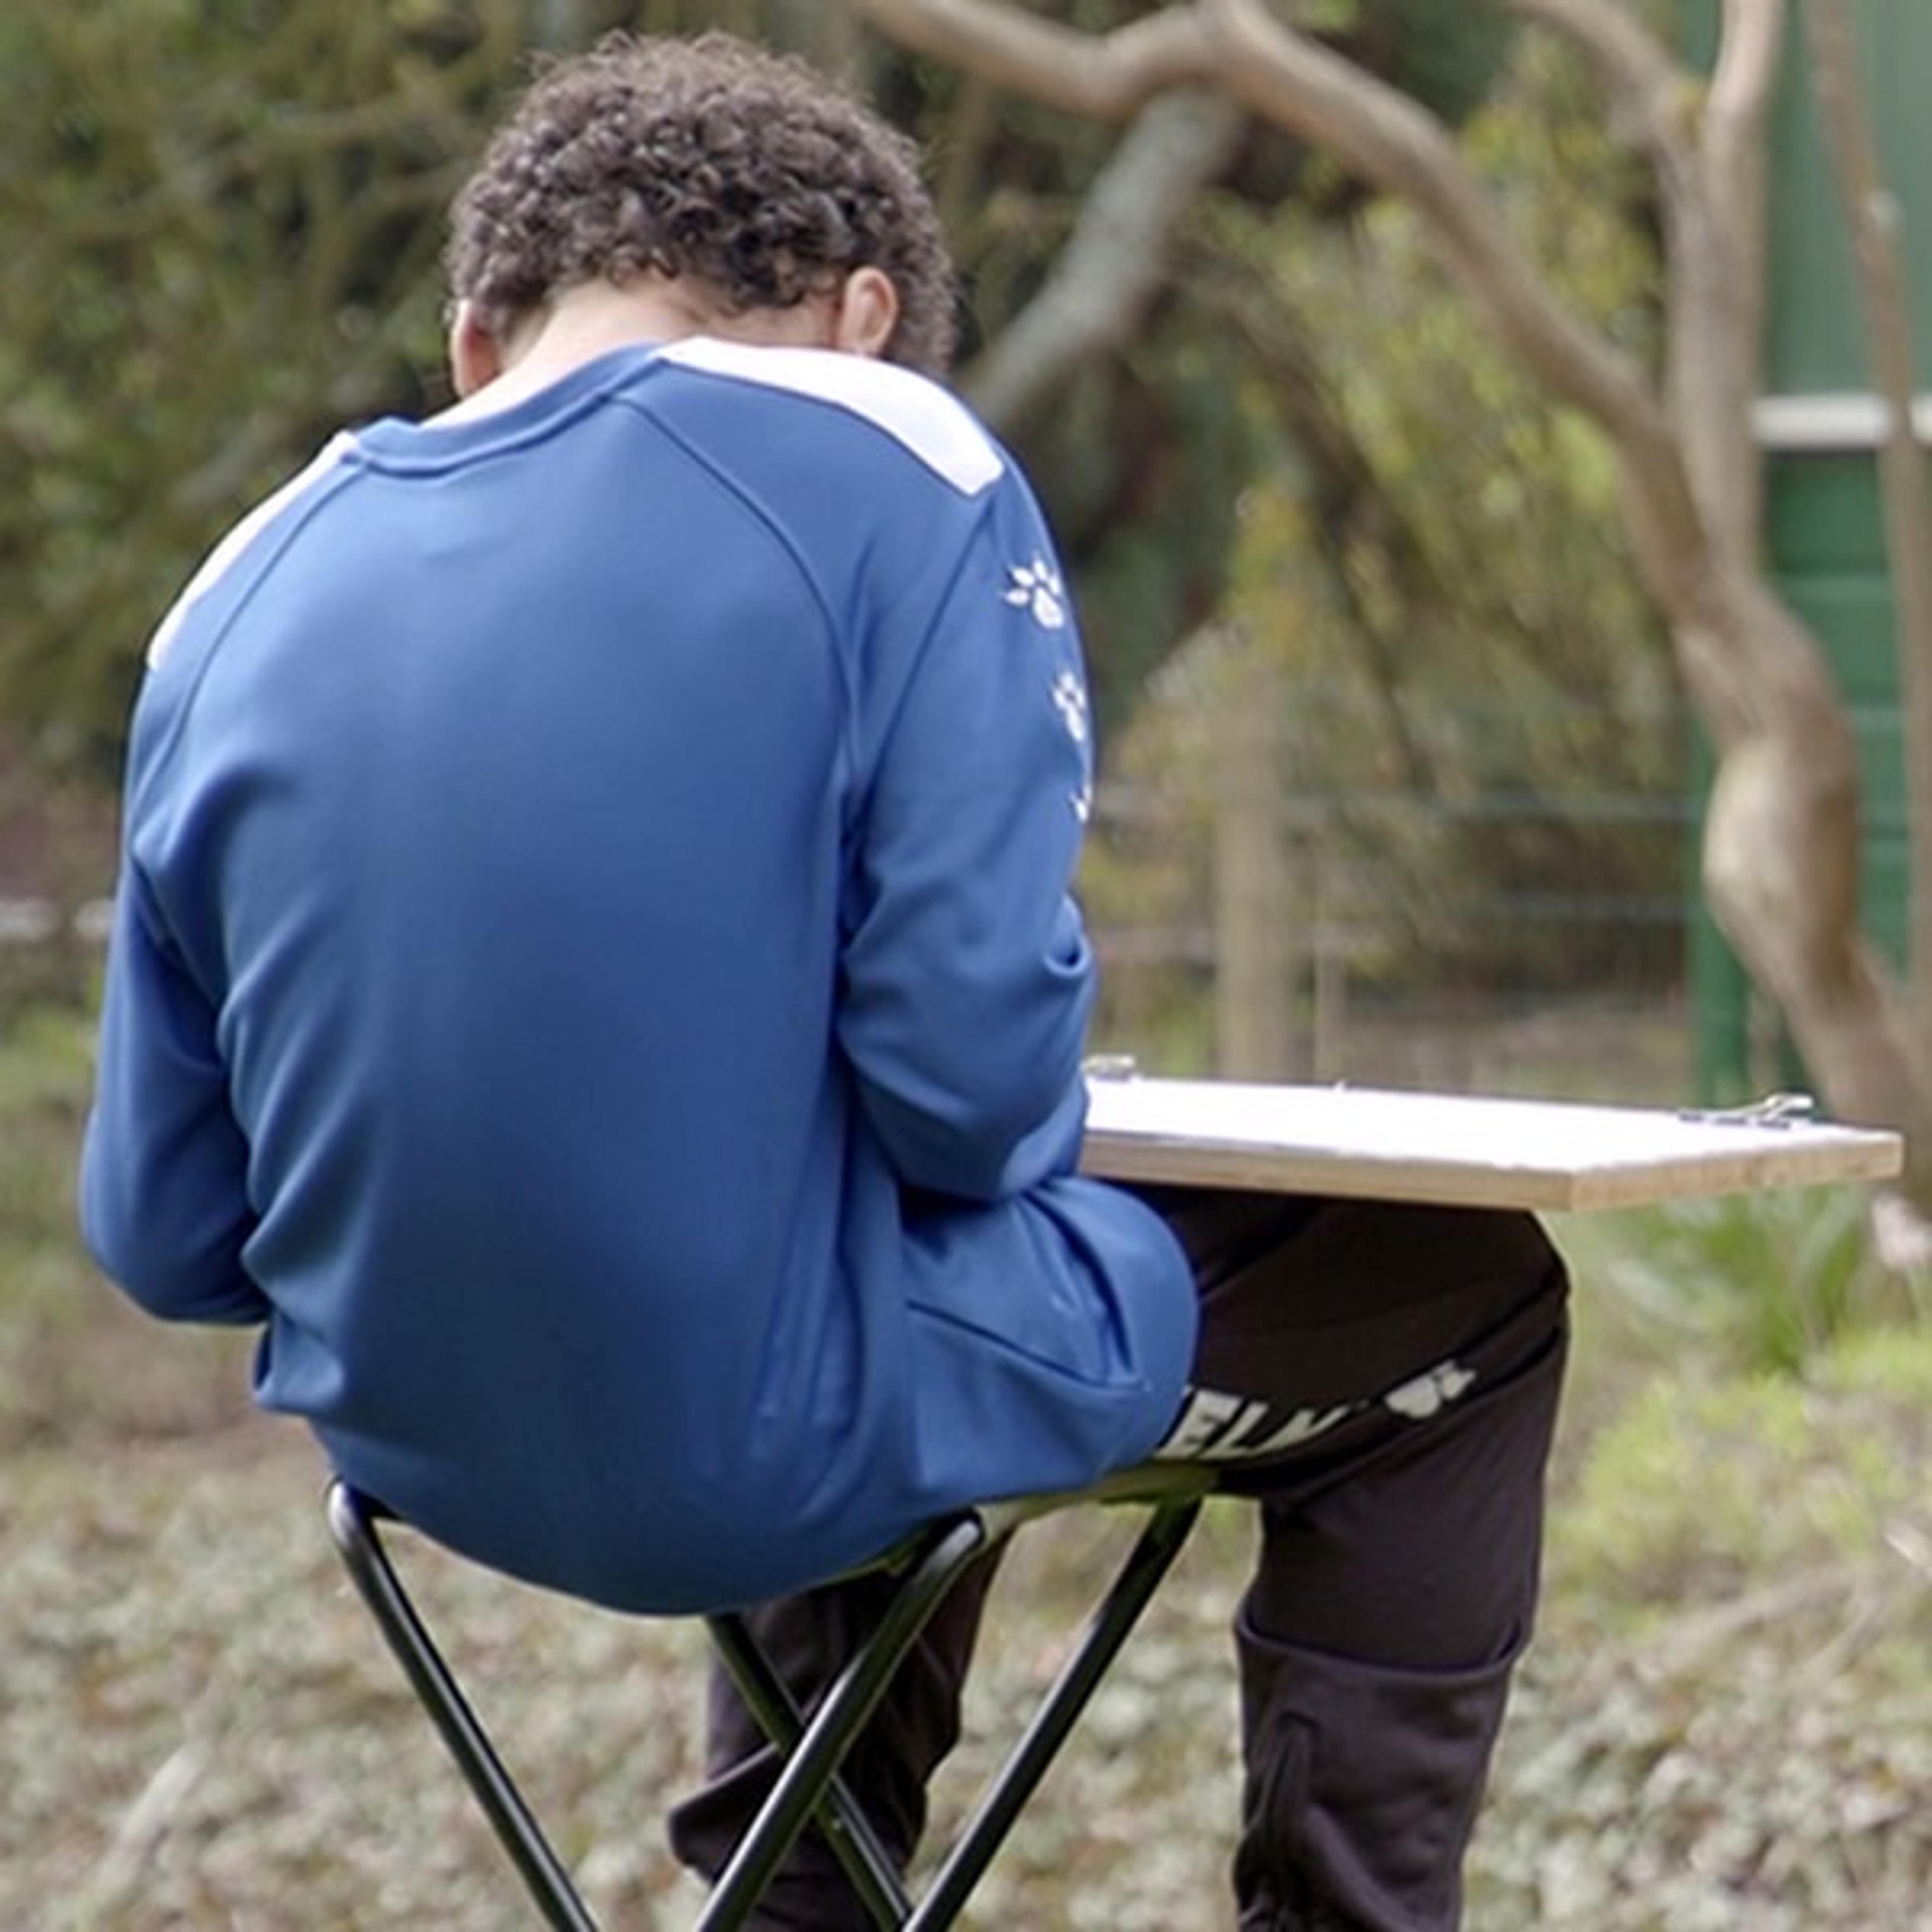 A child with their back to the camera, sat on a folding stool drawing on a piece of paper on a board, in a green, leafy setting.